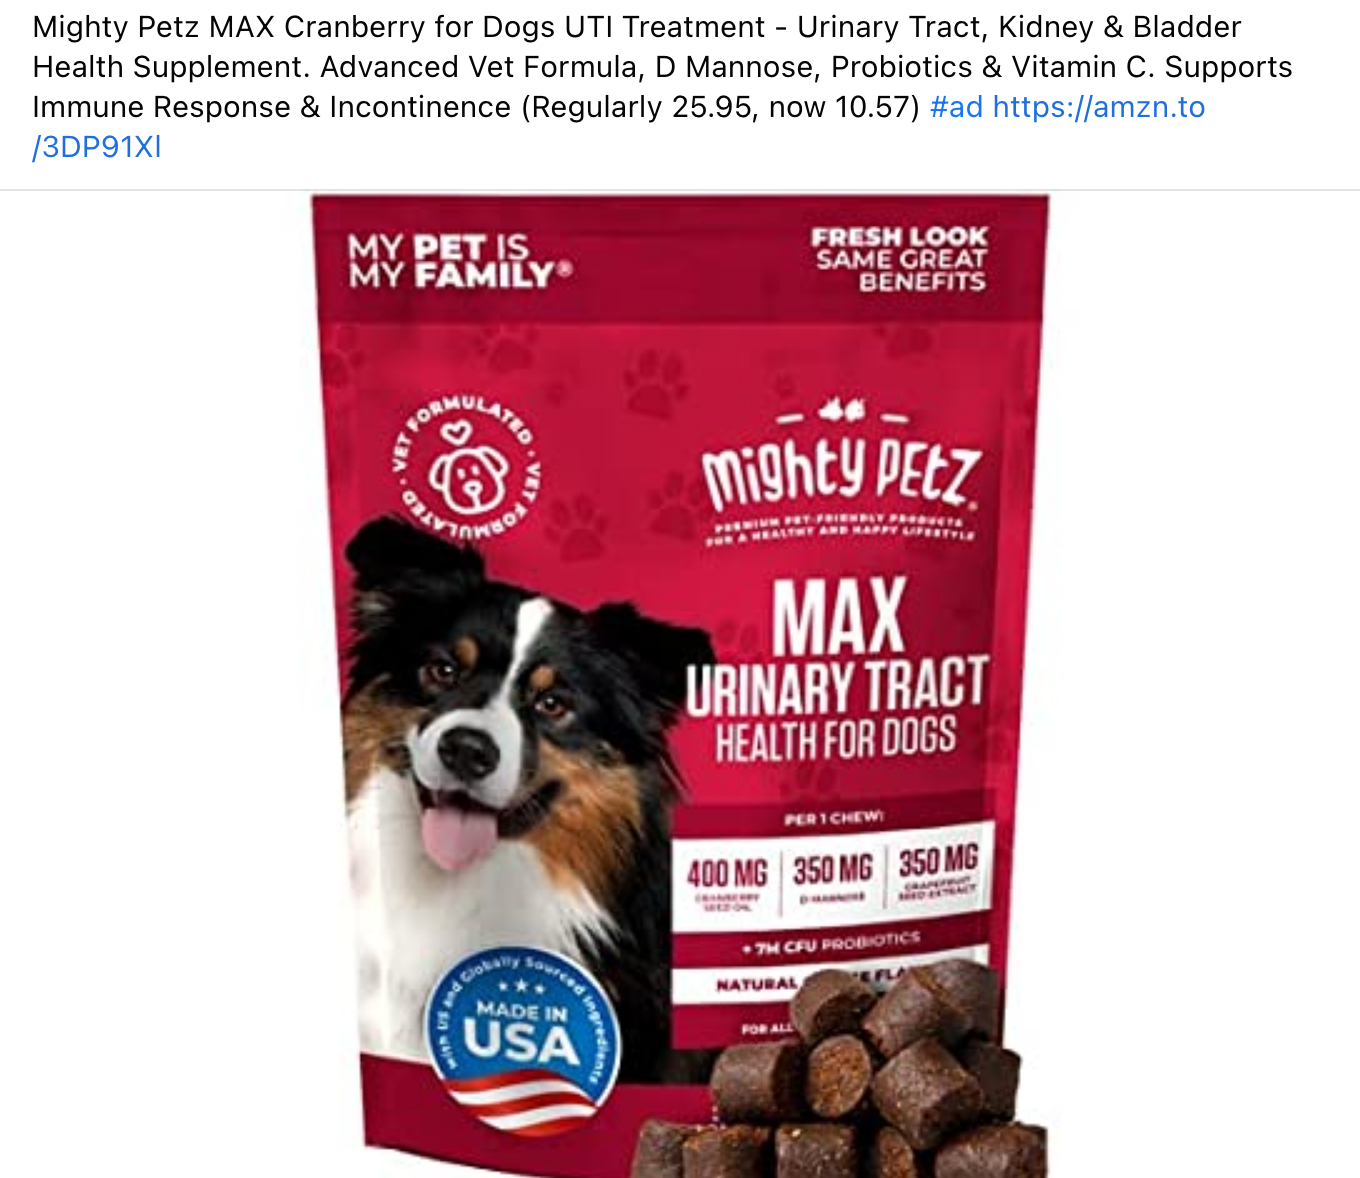 Mighty Petz MAX Cranberry for Dogs UTI Treatment - Urinary Tract, Kidney & Bladder Health Supplement. Advanced Vet Formula, D Mannose, Probiotics & Vitamin C. Supports Immune Response & Incontinence 